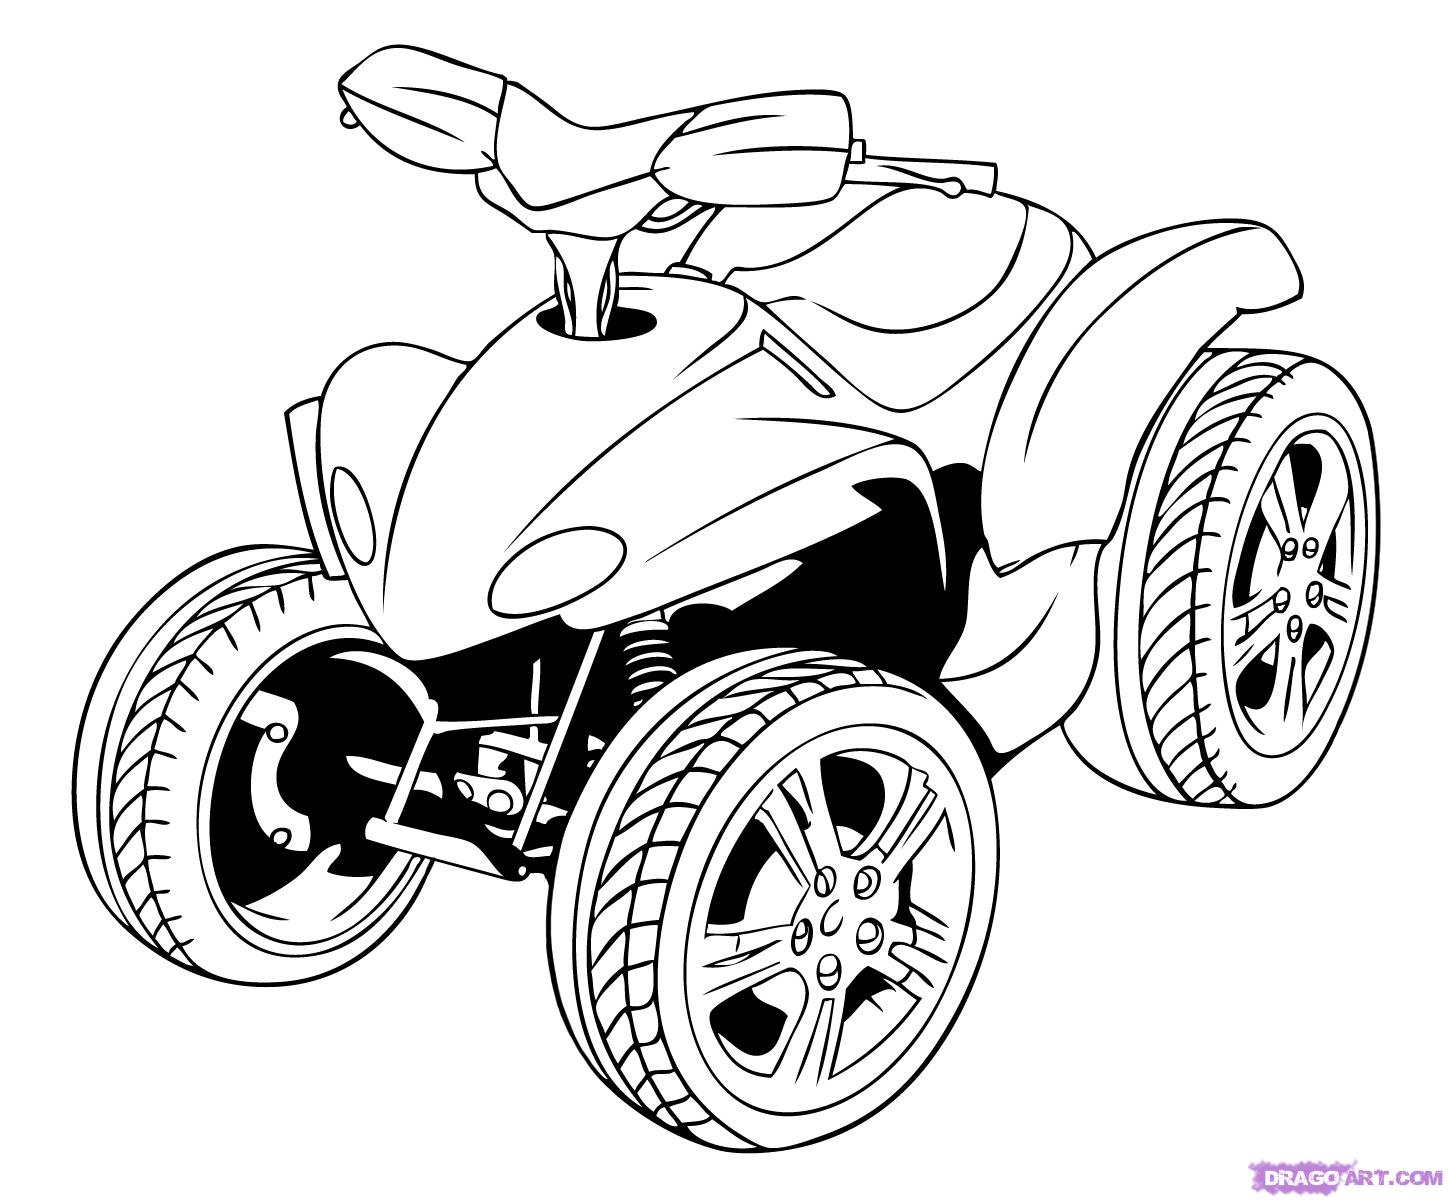 Atv clipart drawing. At paintingvalley com explore